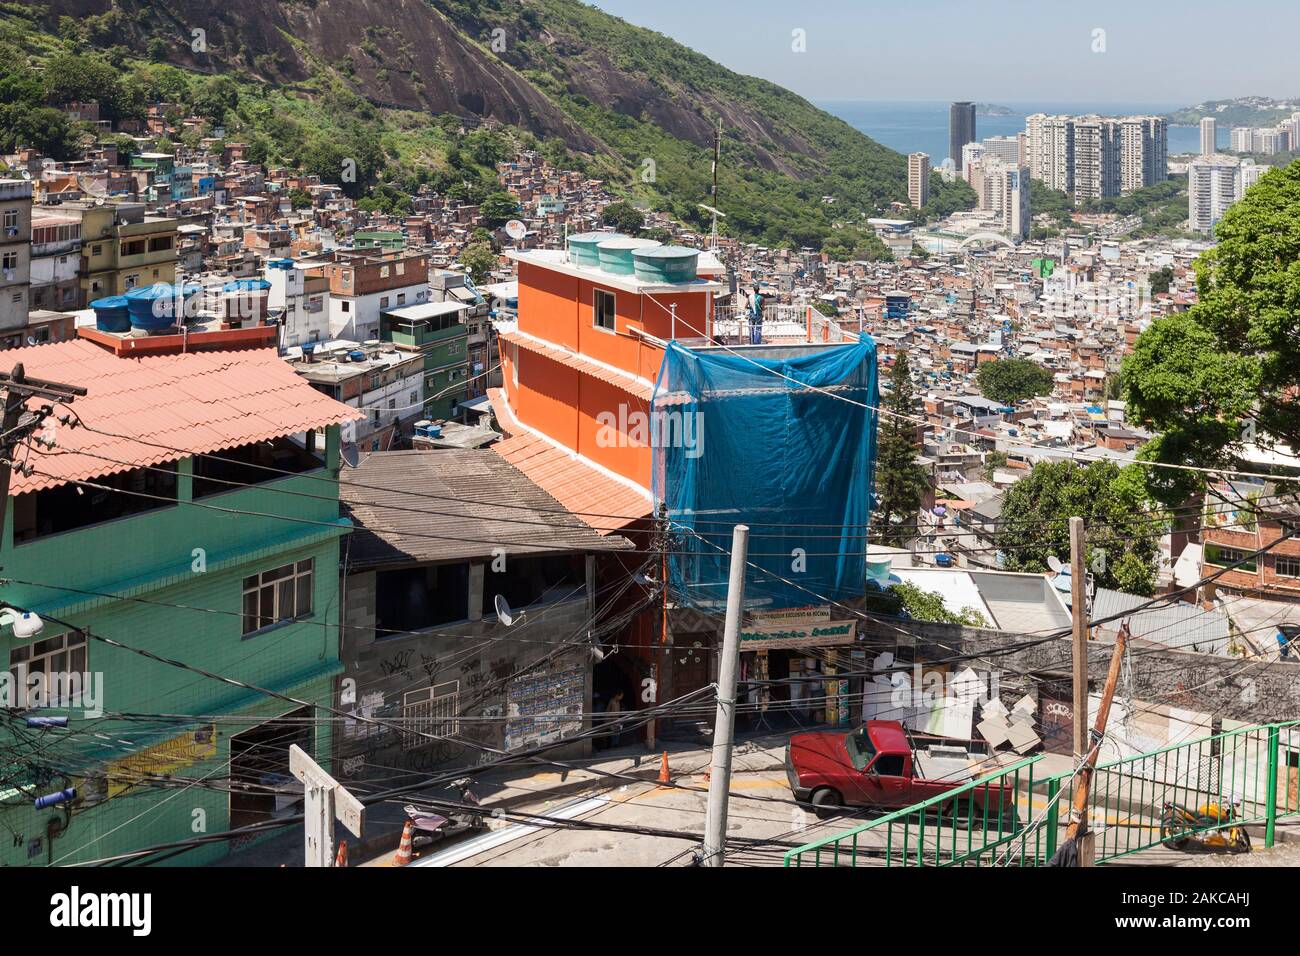 Brazil, state of Rio de Janeiro, city of Rio de Janeiro, favela Rocinha, Carioca landscapes between the mountain and the sea classified UNESCO World Heritage, elevated view of a favela street and the sea in the background Stock Photo